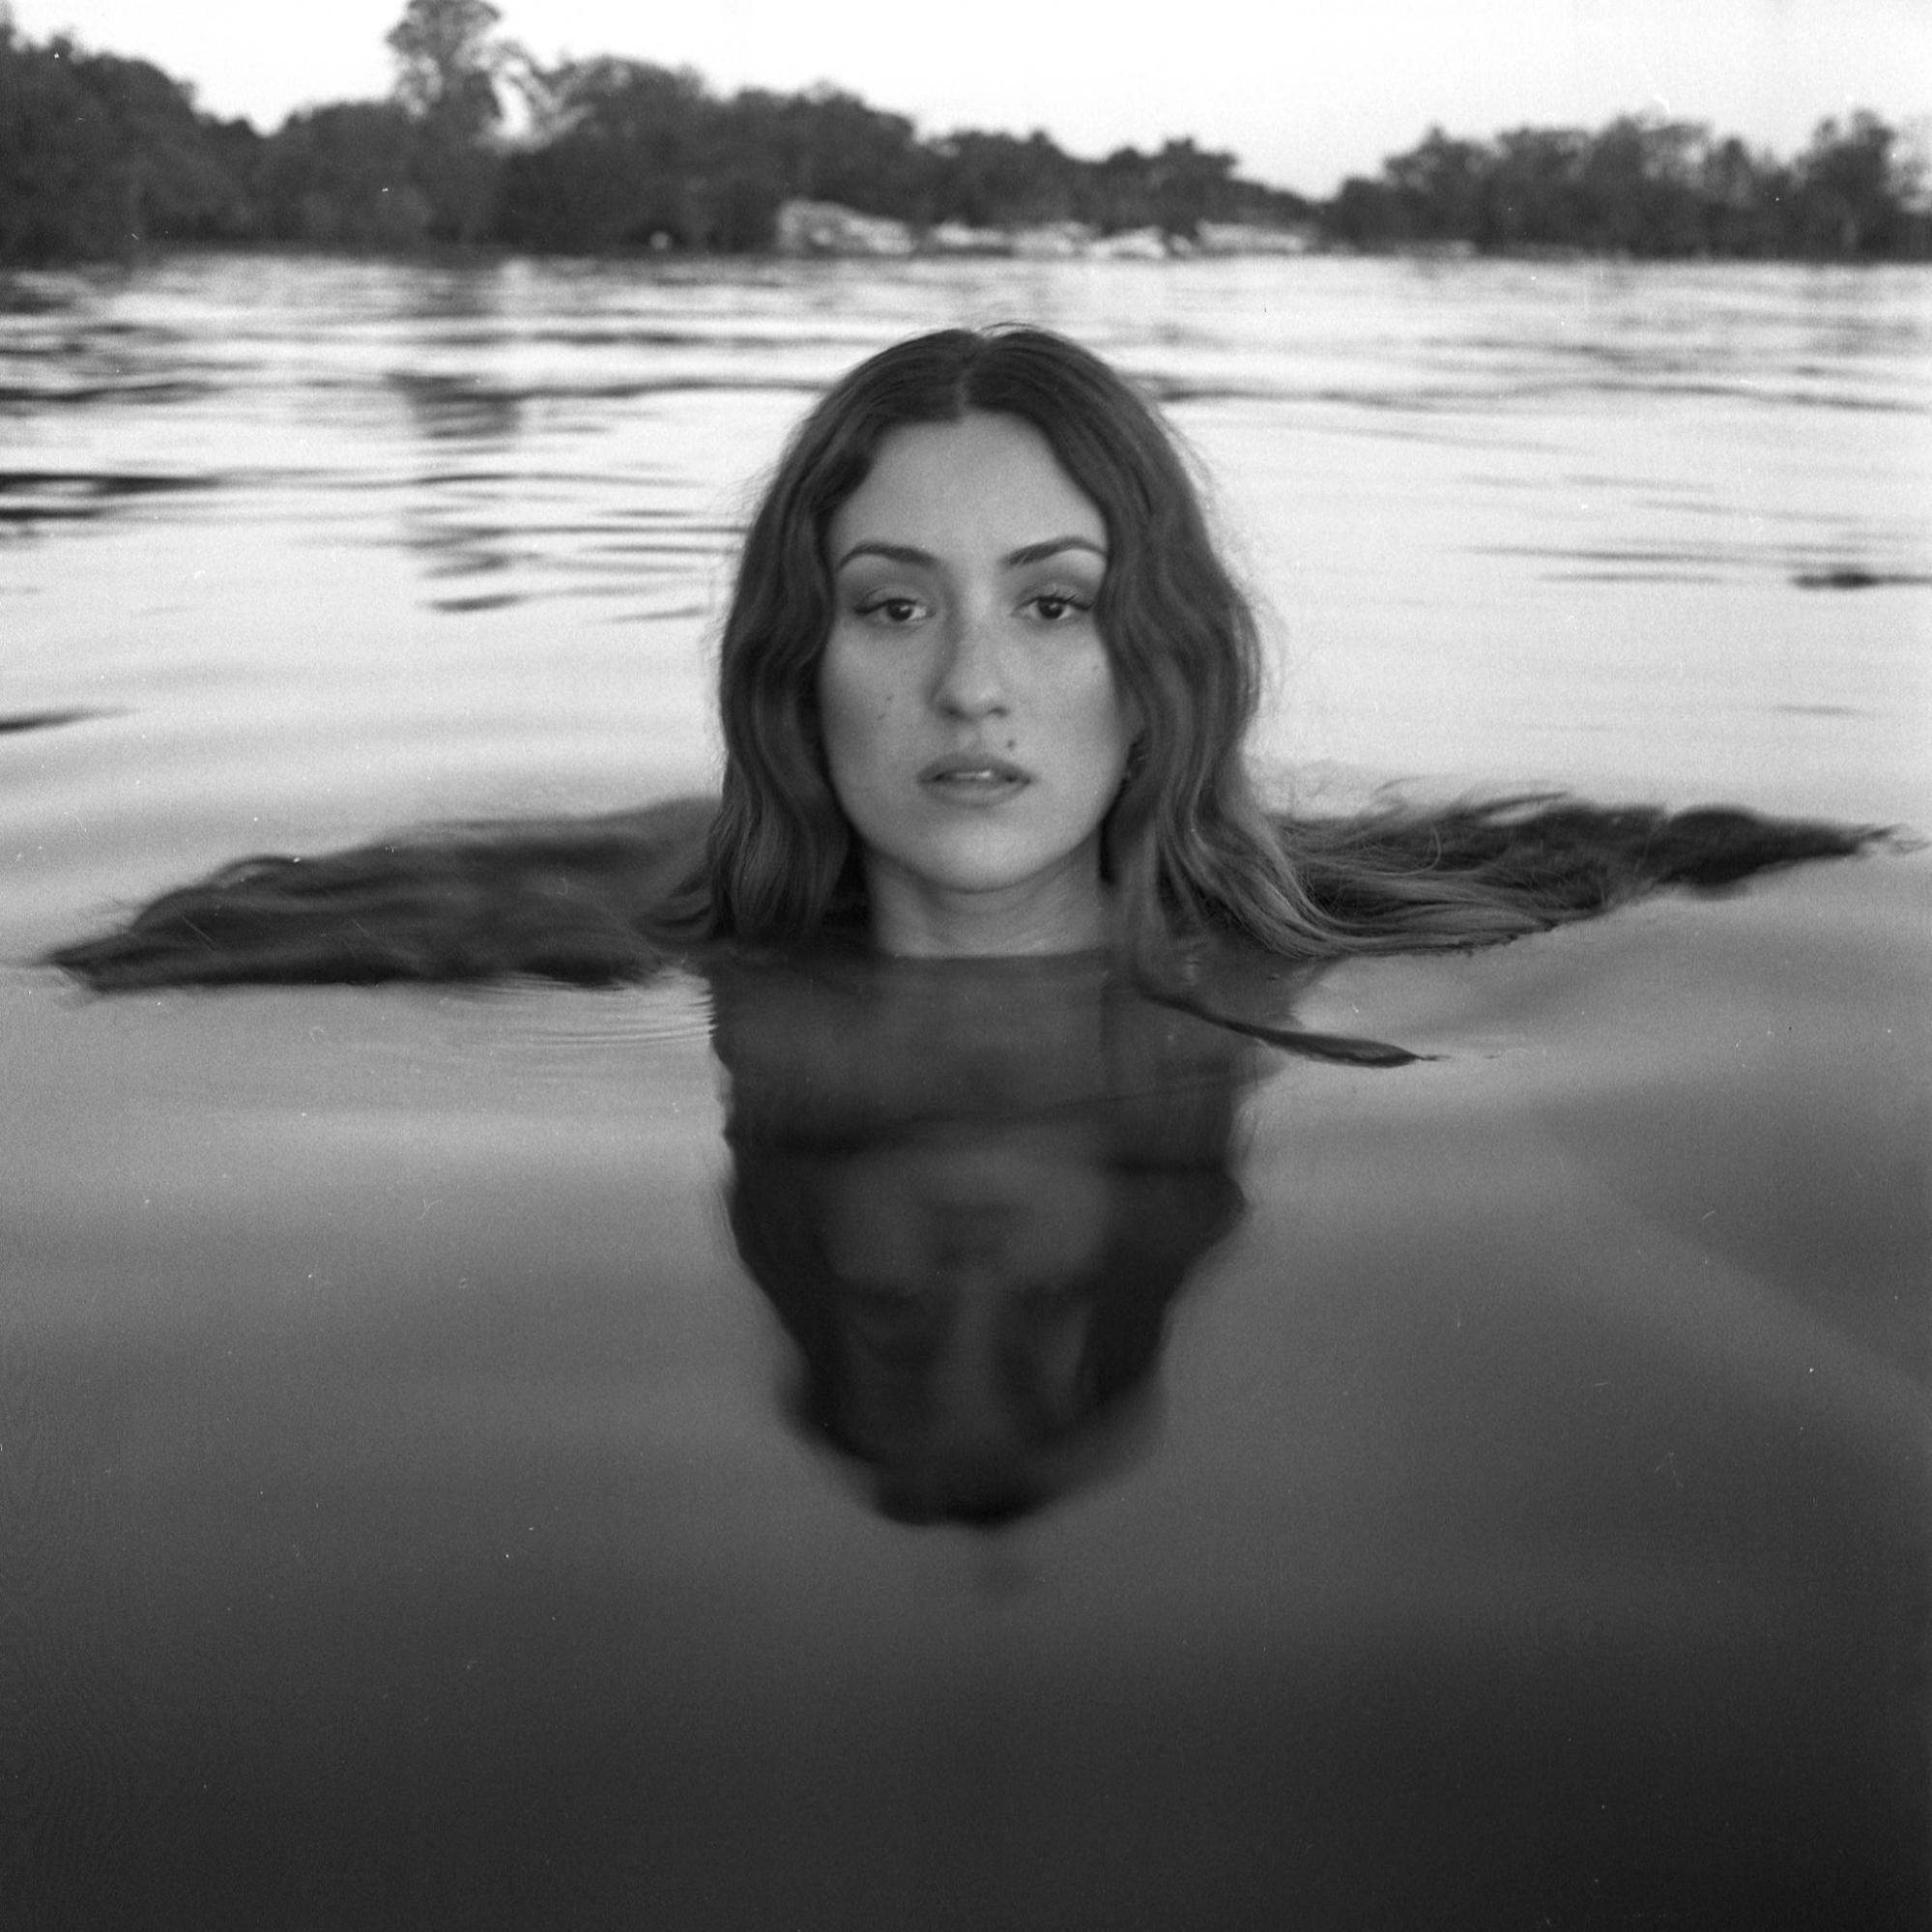 “Water Nymph”, Self Portrait, “Body of Water” series, 2020. Shot on Ilford HP5+ 400, Yashica Mat 124g. Clara Anaujo for In Focus